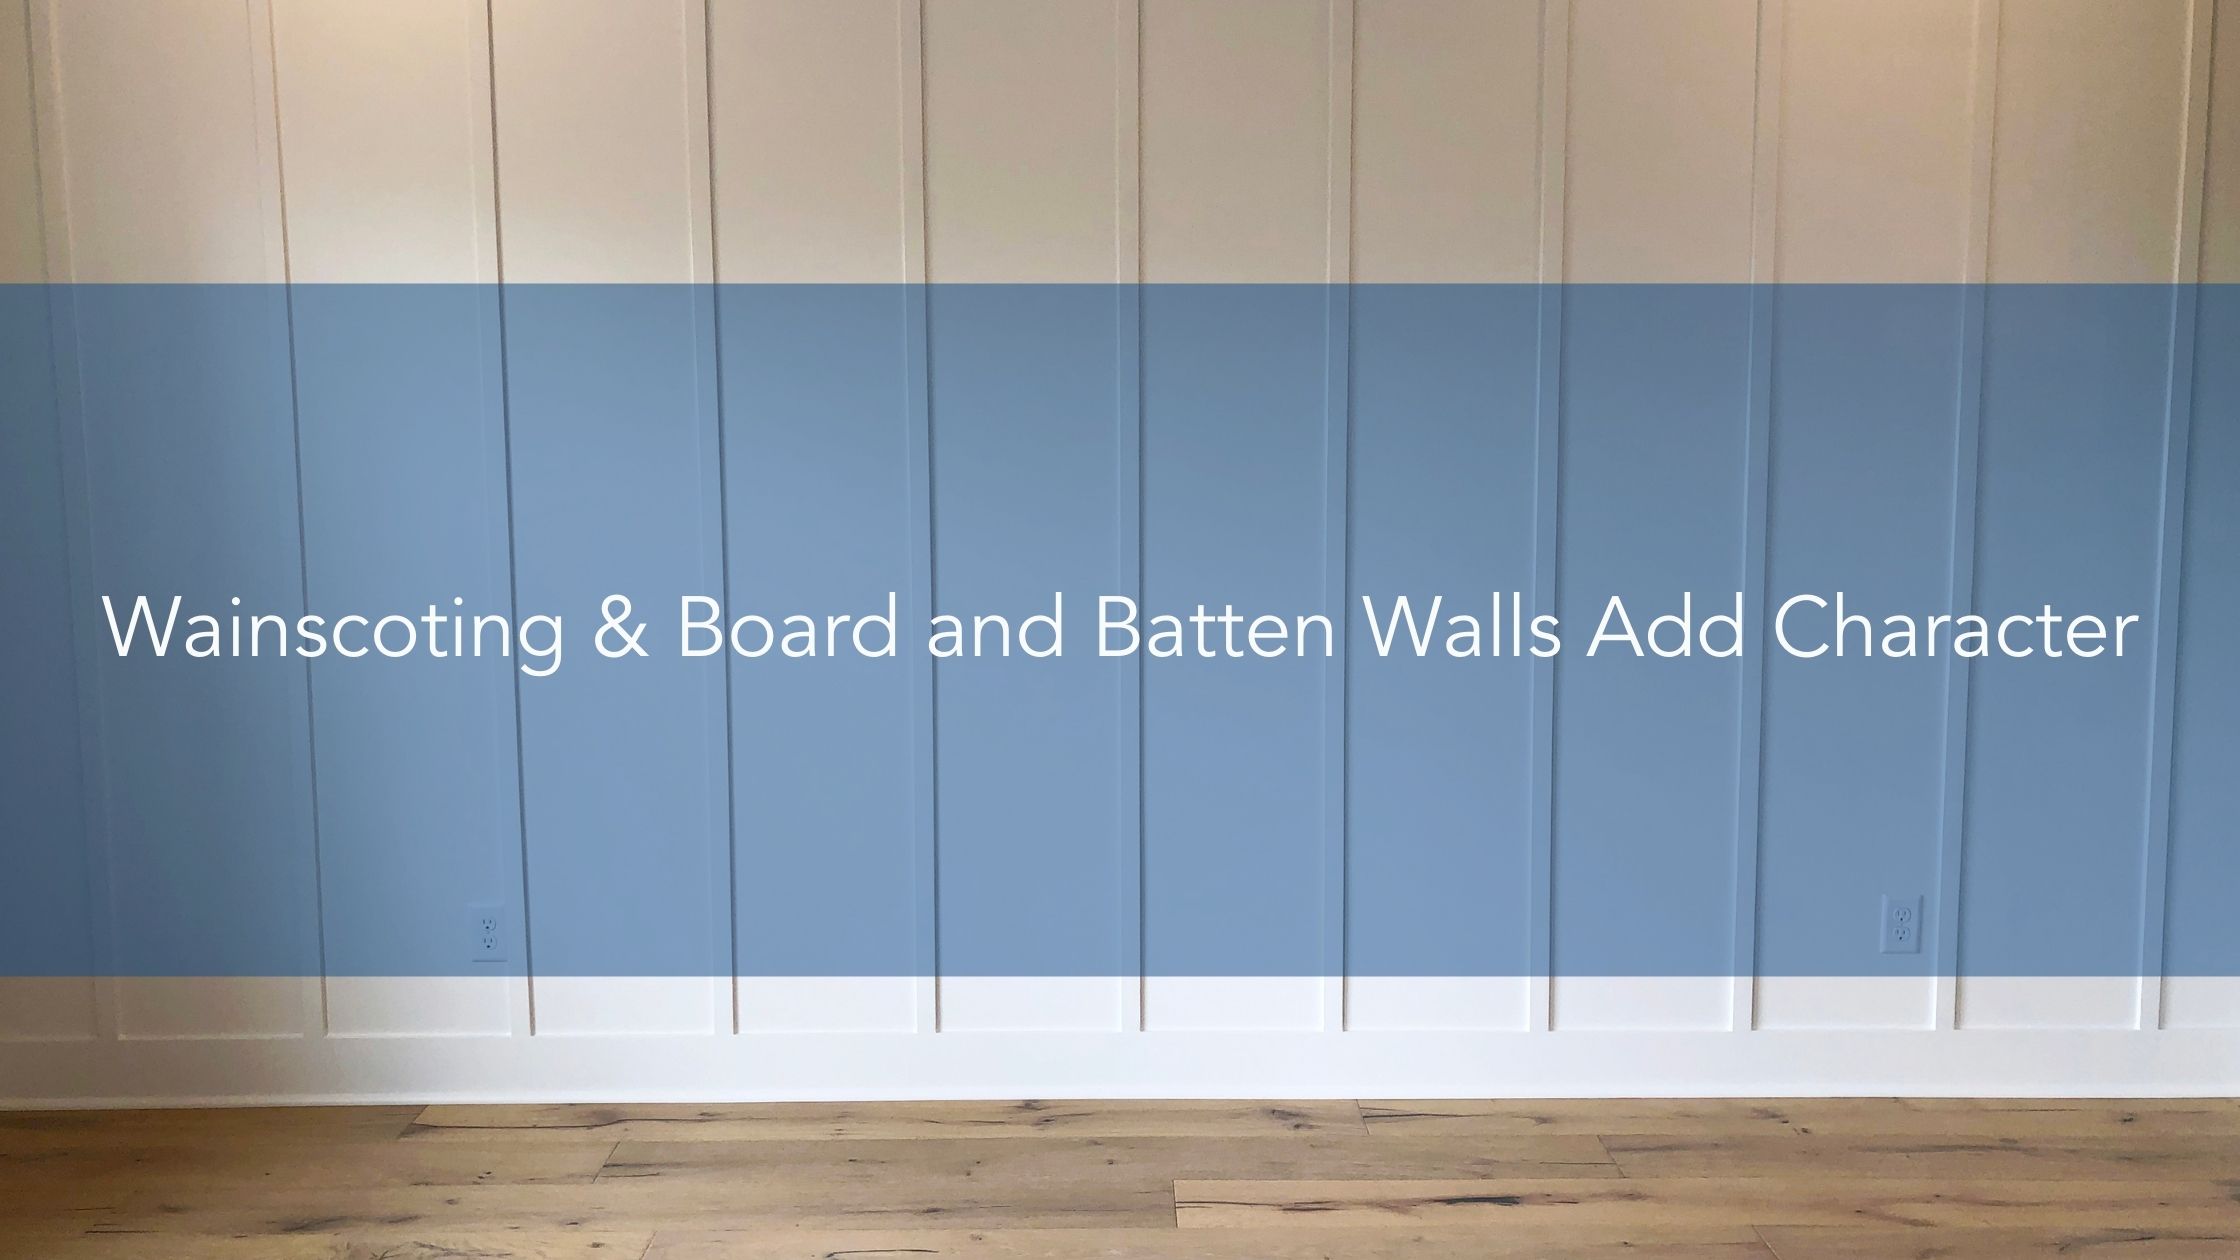 Wainscoting & Board and Batten Walls Add Character